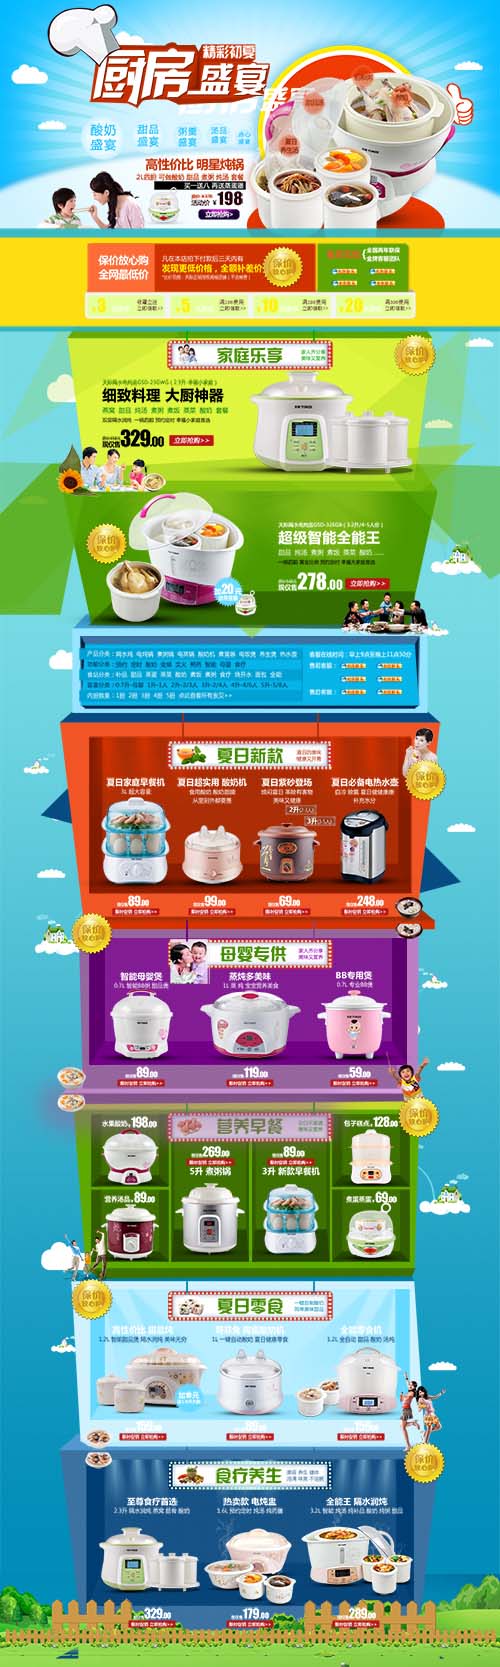 PSD Web Template - Equipment for Chefs - Chinese